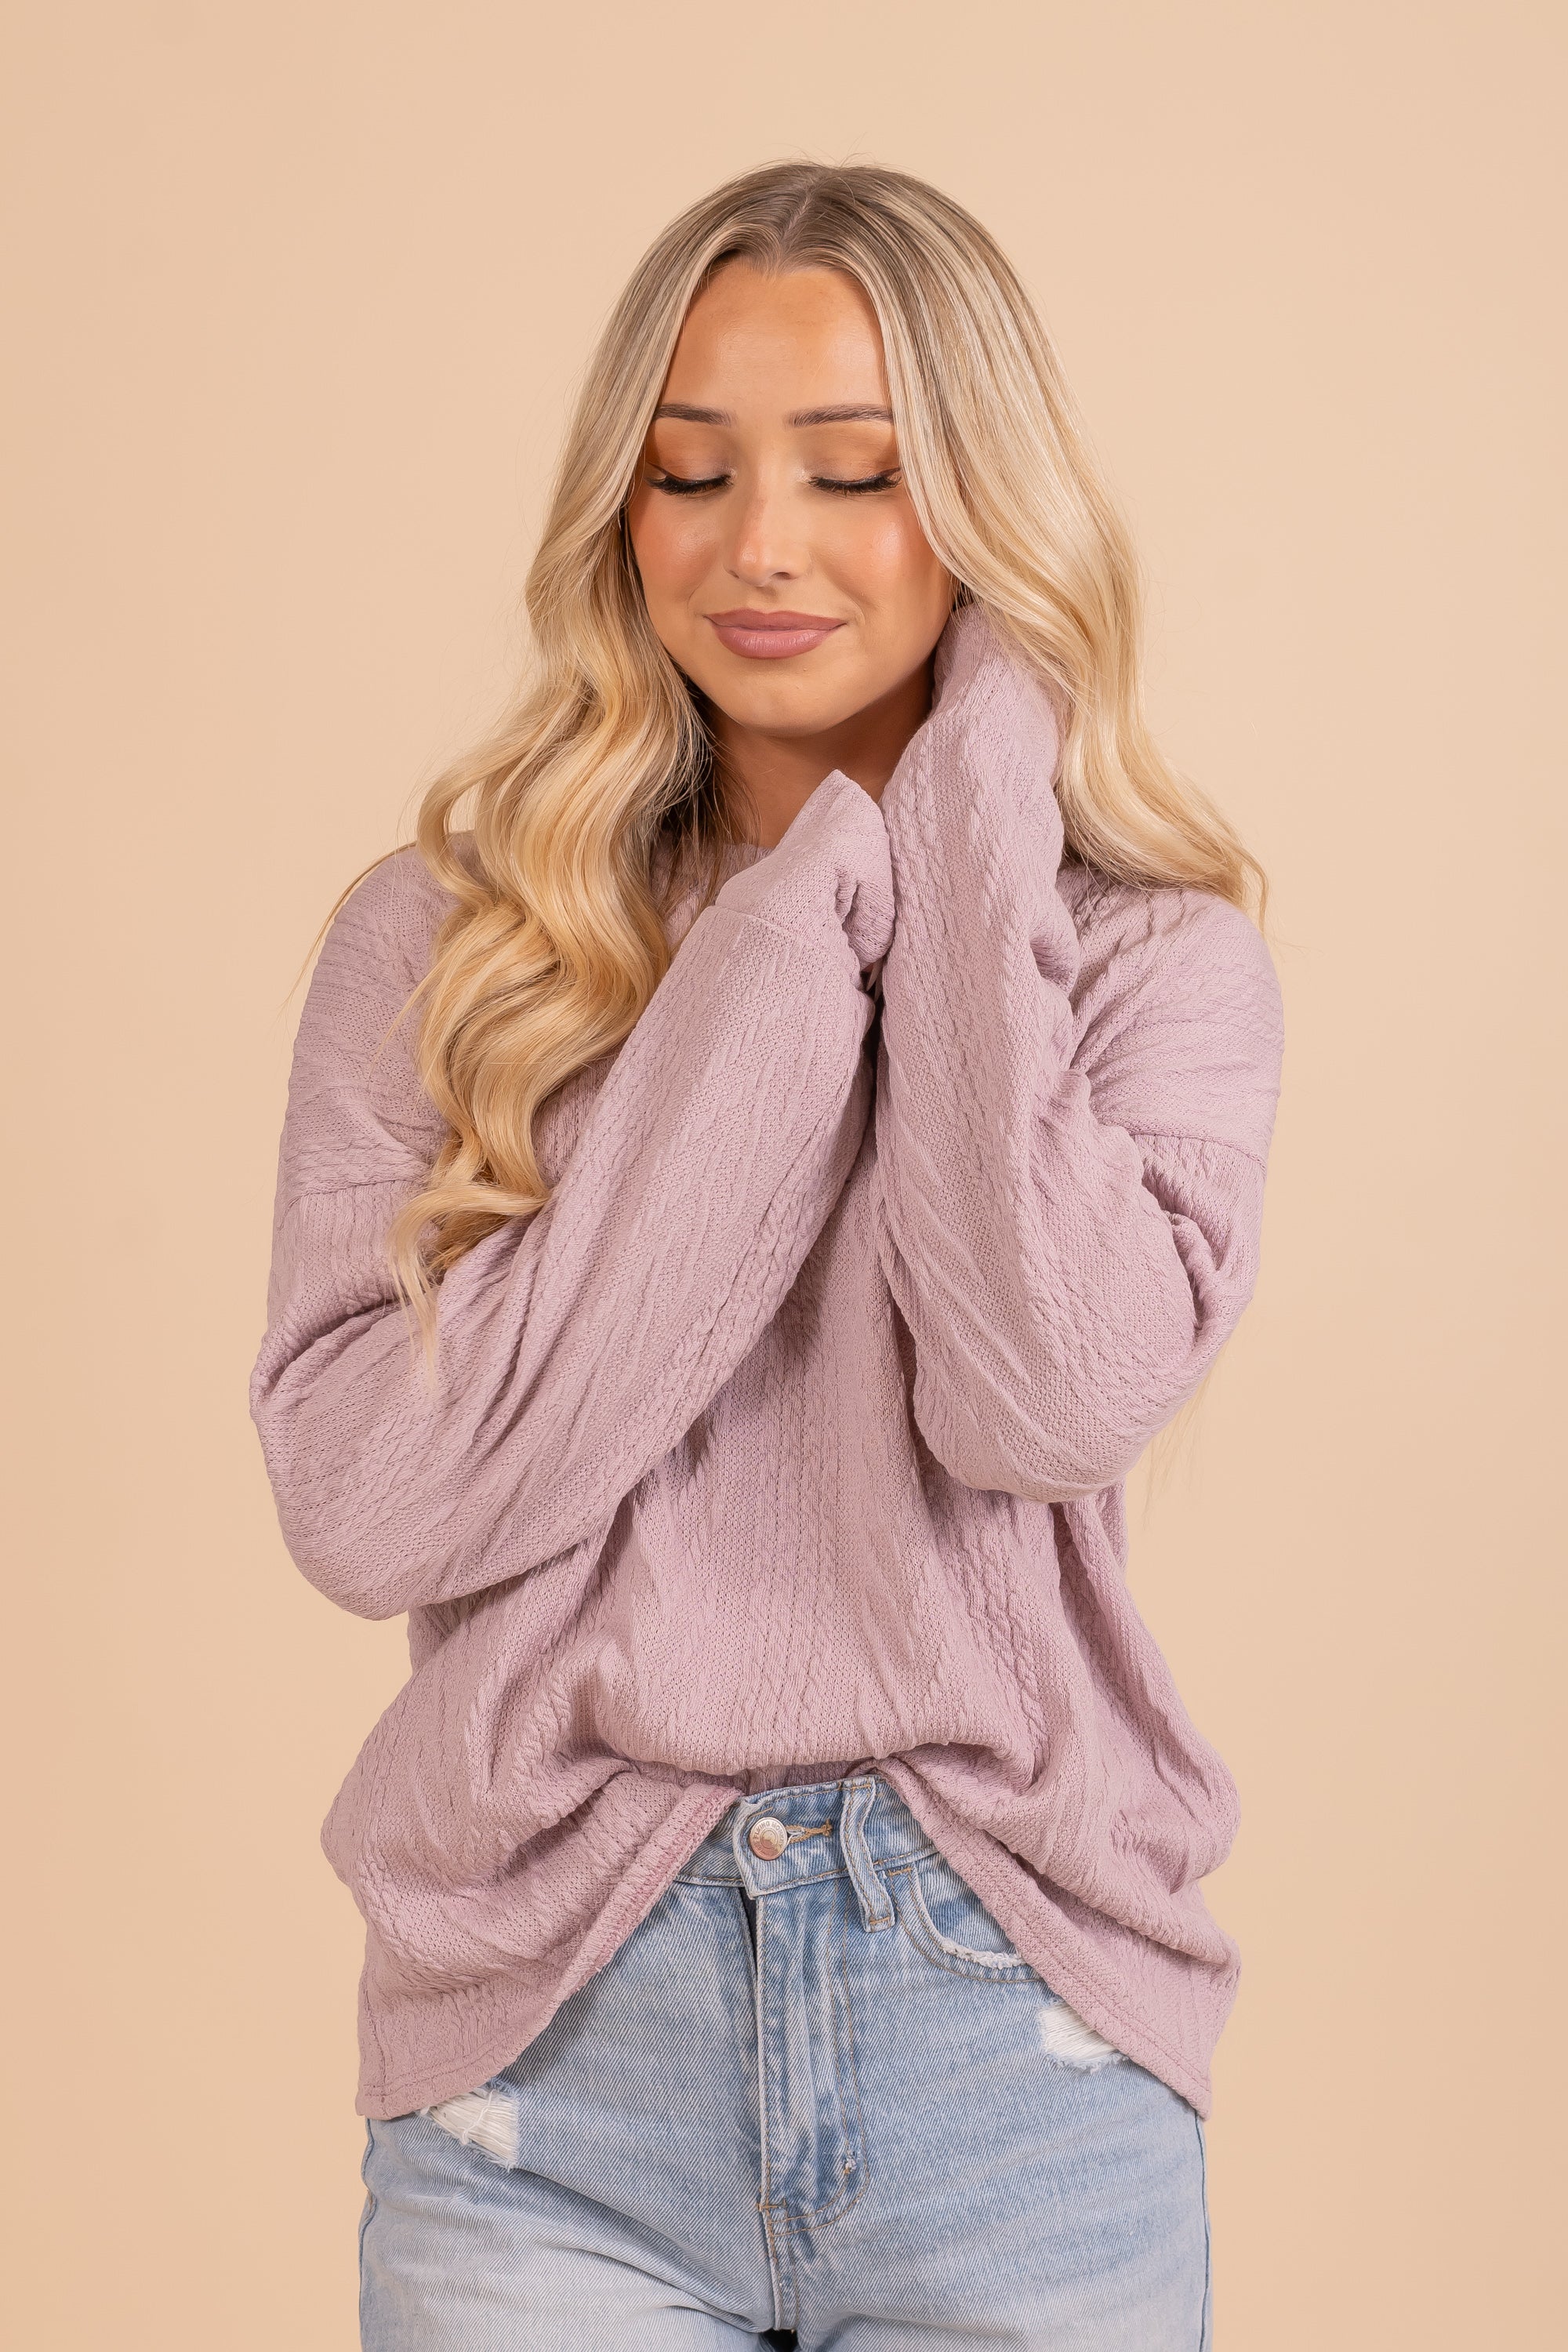 Cozy Cable Knit Textured Pullover